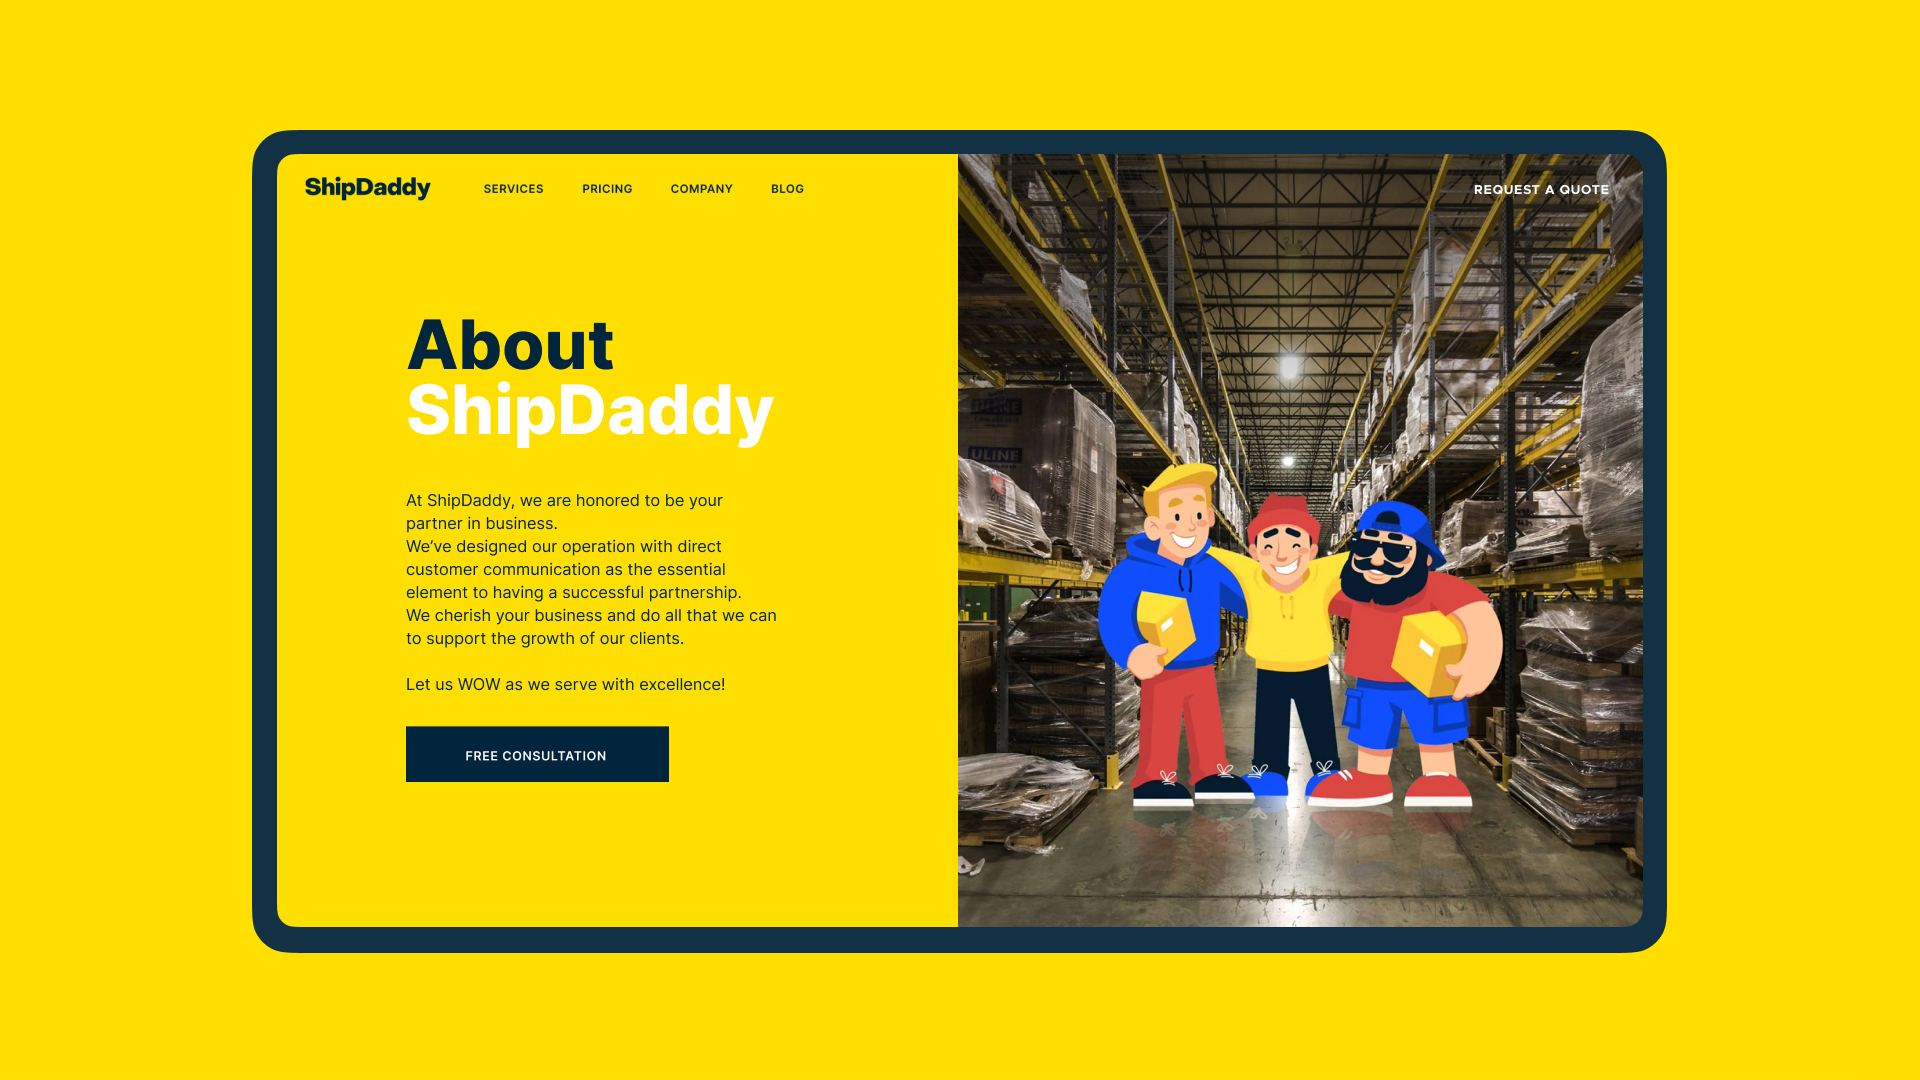 Design Case Study: Identity and Website for Shipping Service